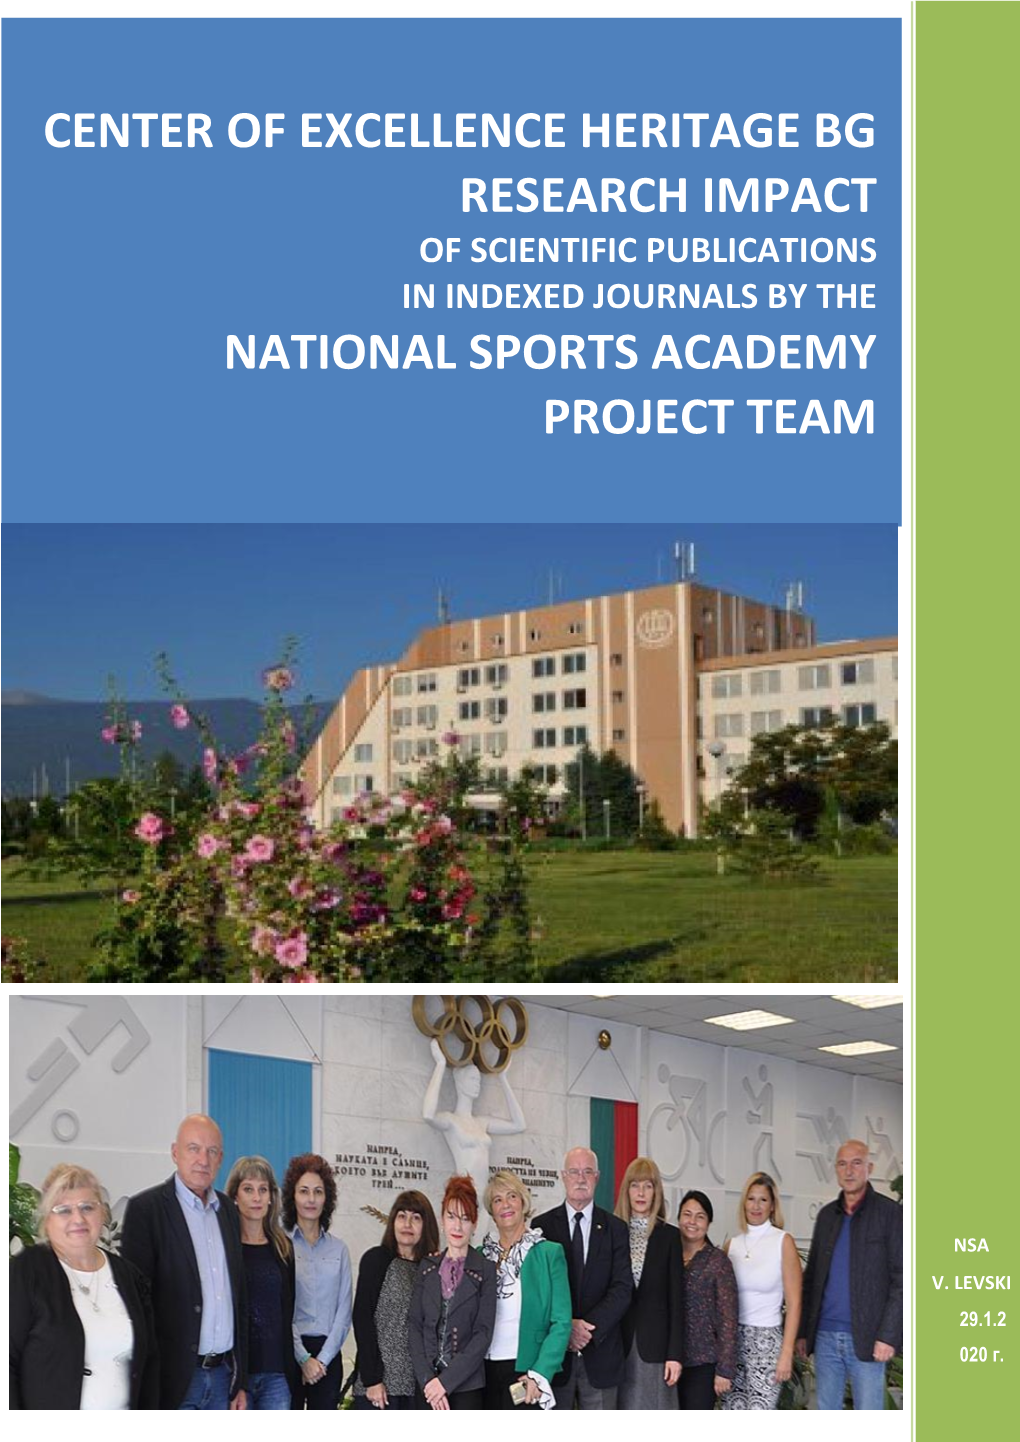 Center of Excellence Heritage Bg Research Impact 0 of Scientific Publications in Indexed Journals by the 2 National Sports Academy 0 Project Team